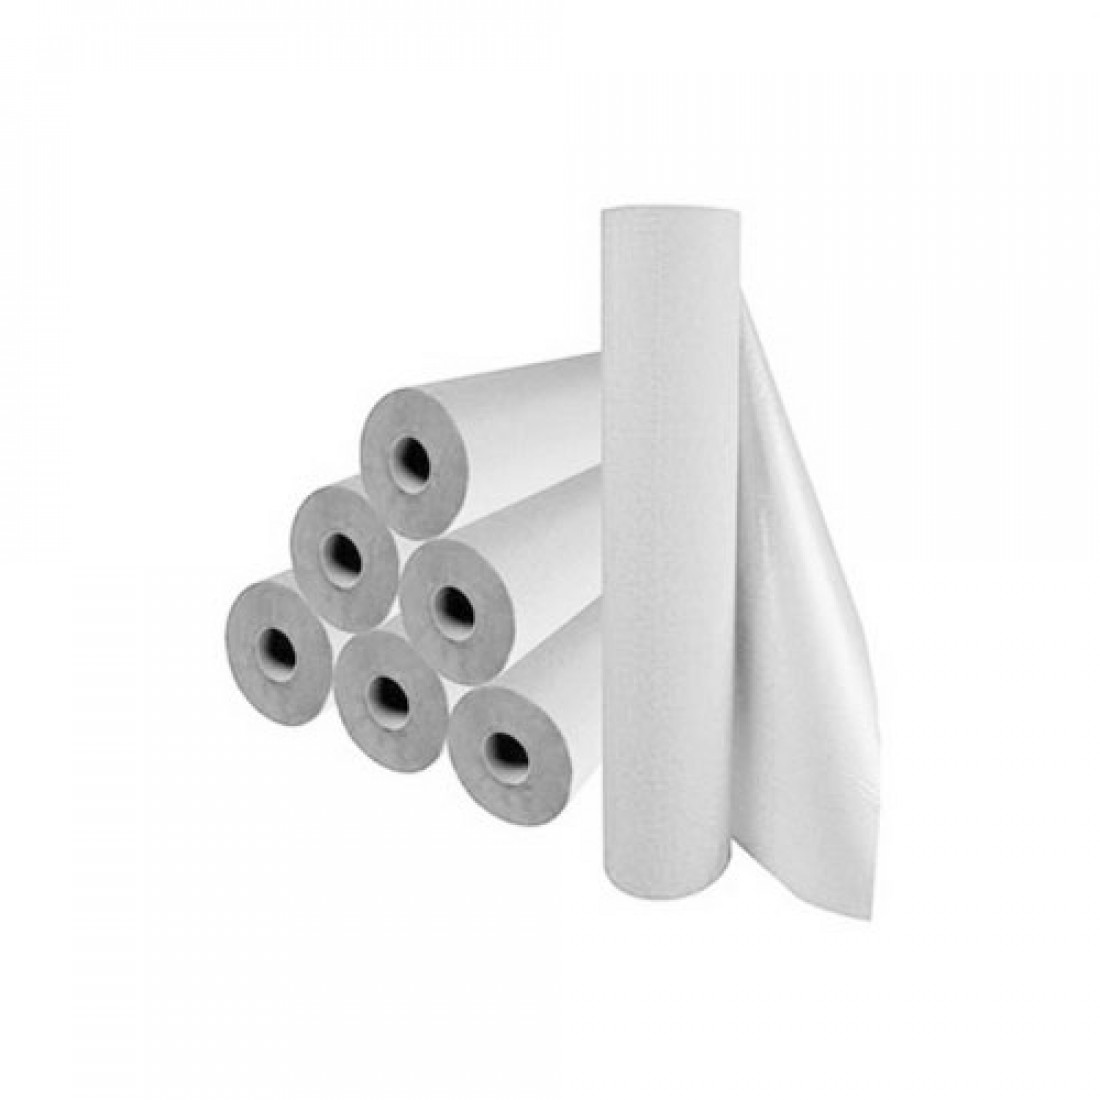 Bed roll paper 58x50cm 12pcs-3710133 SINGLE USE PRODUCTS